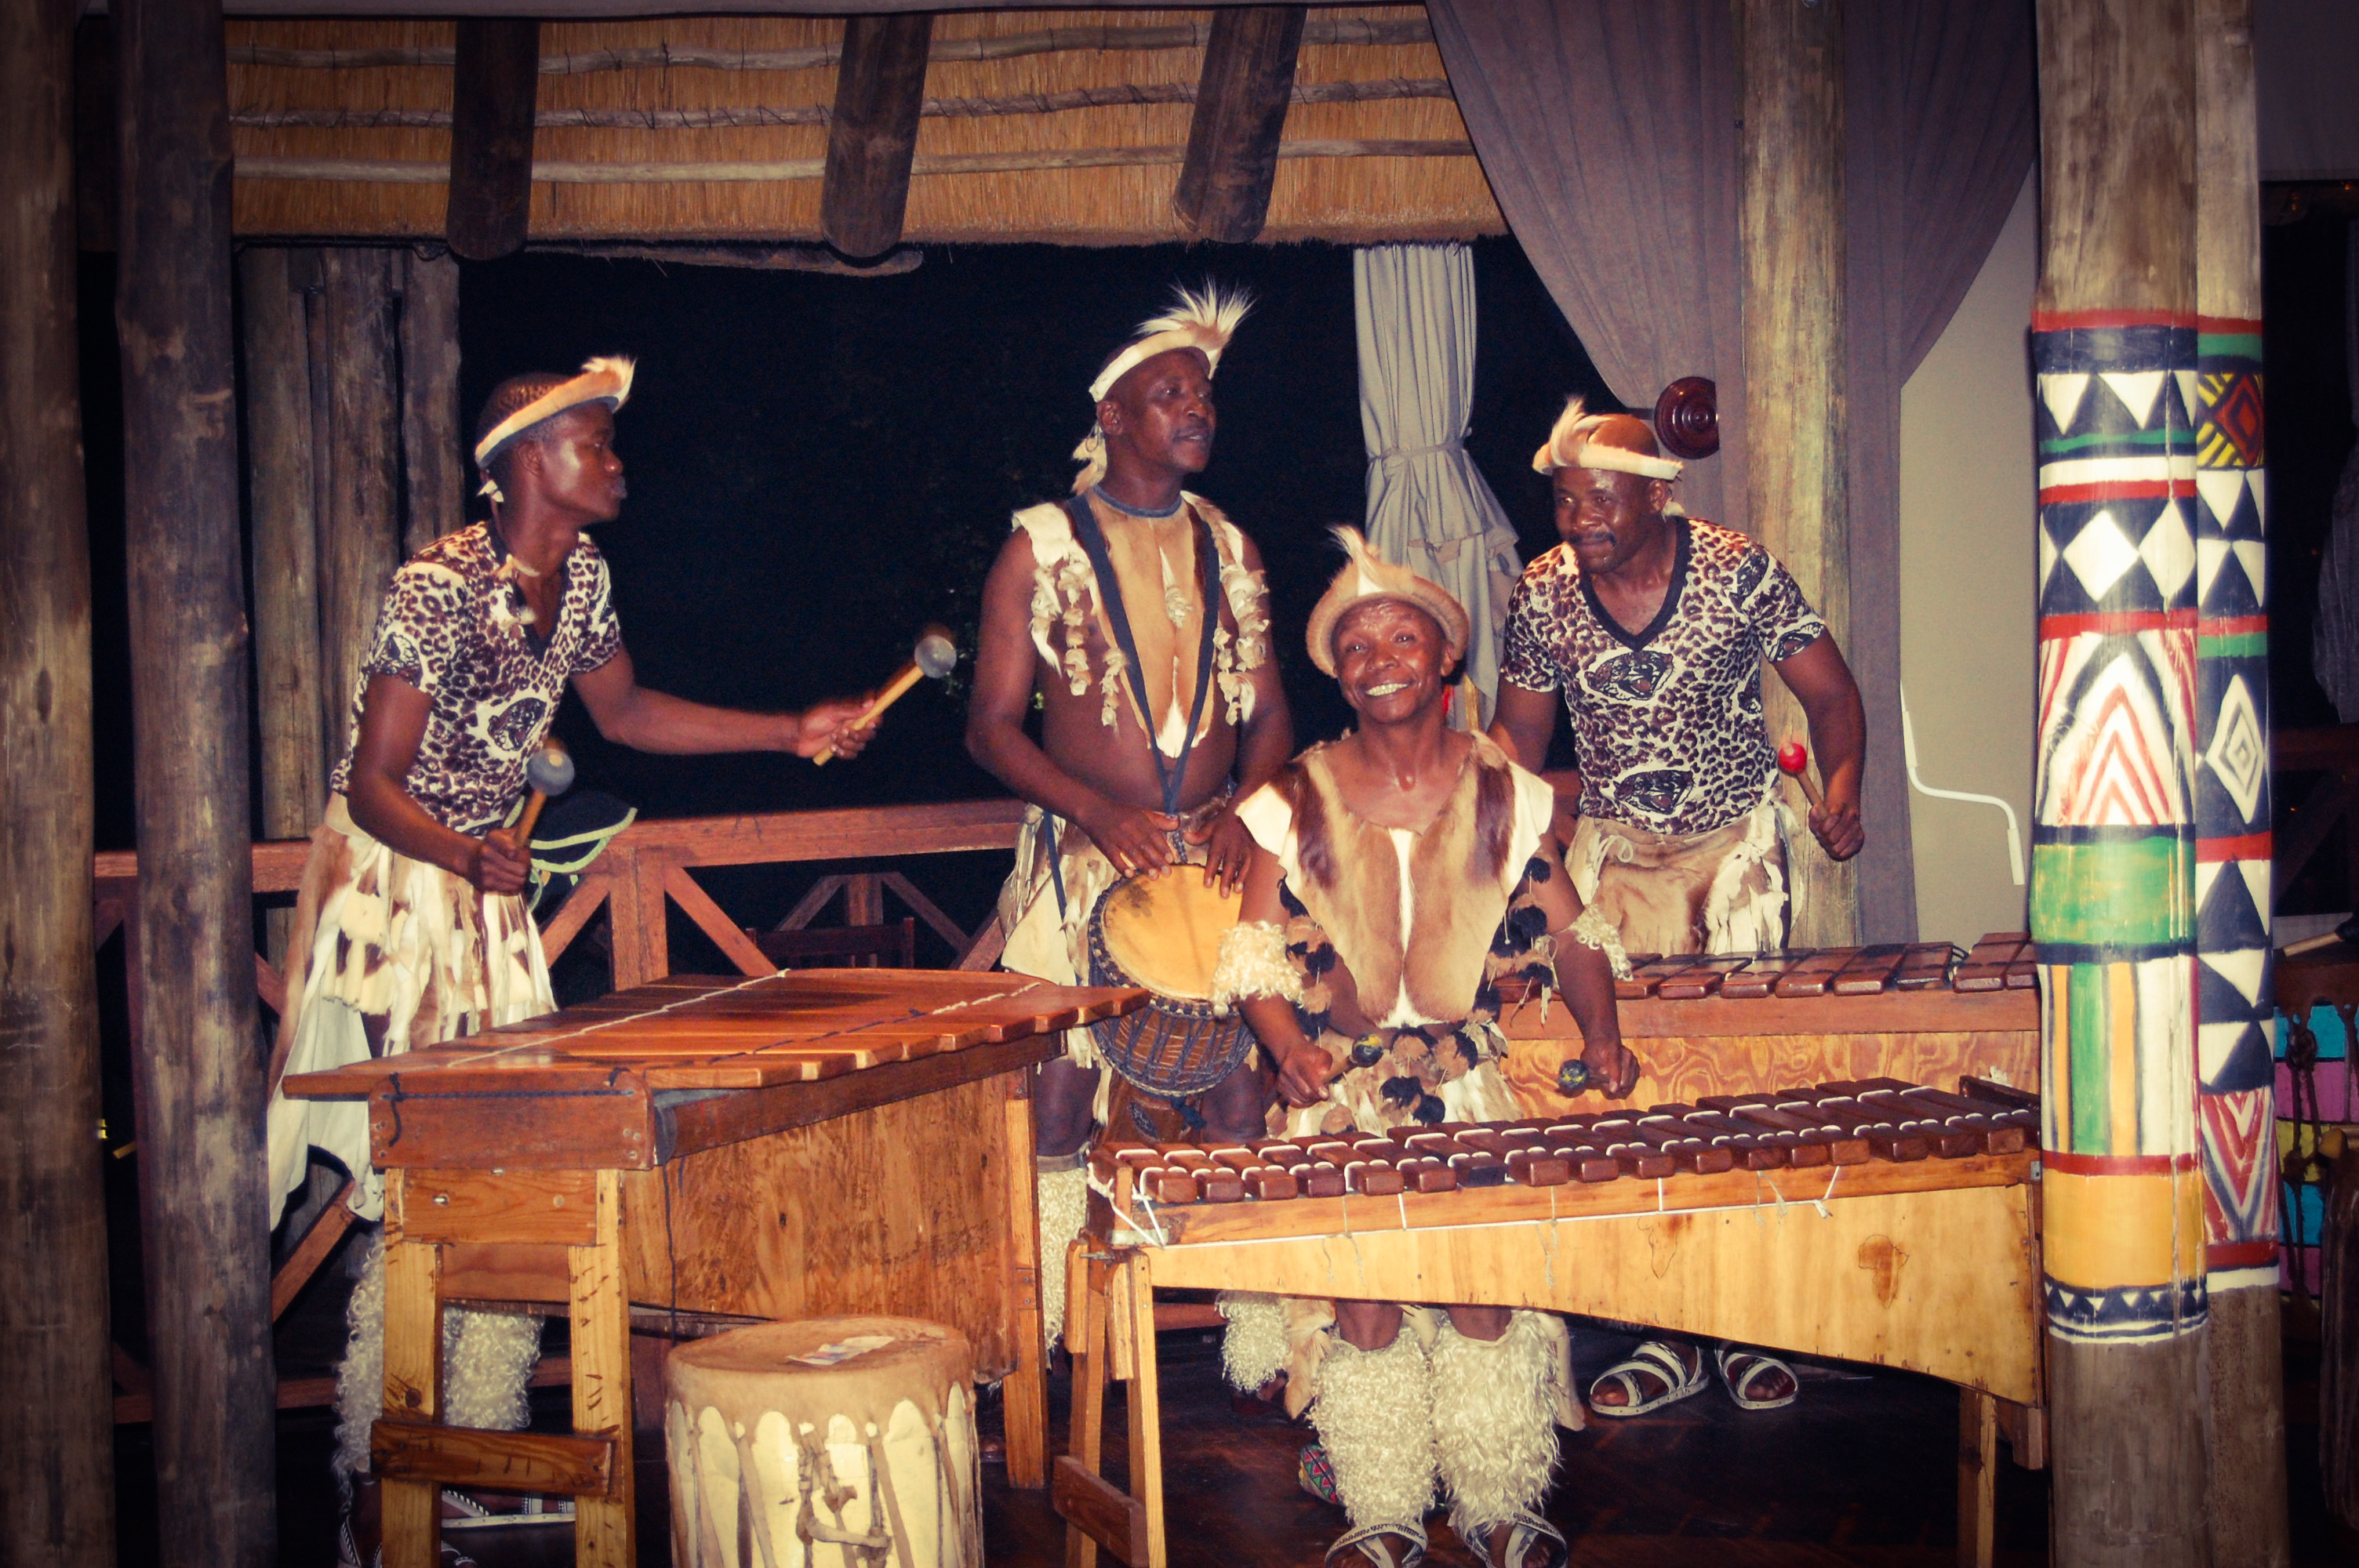 A South African band playing joyful music at a reception.